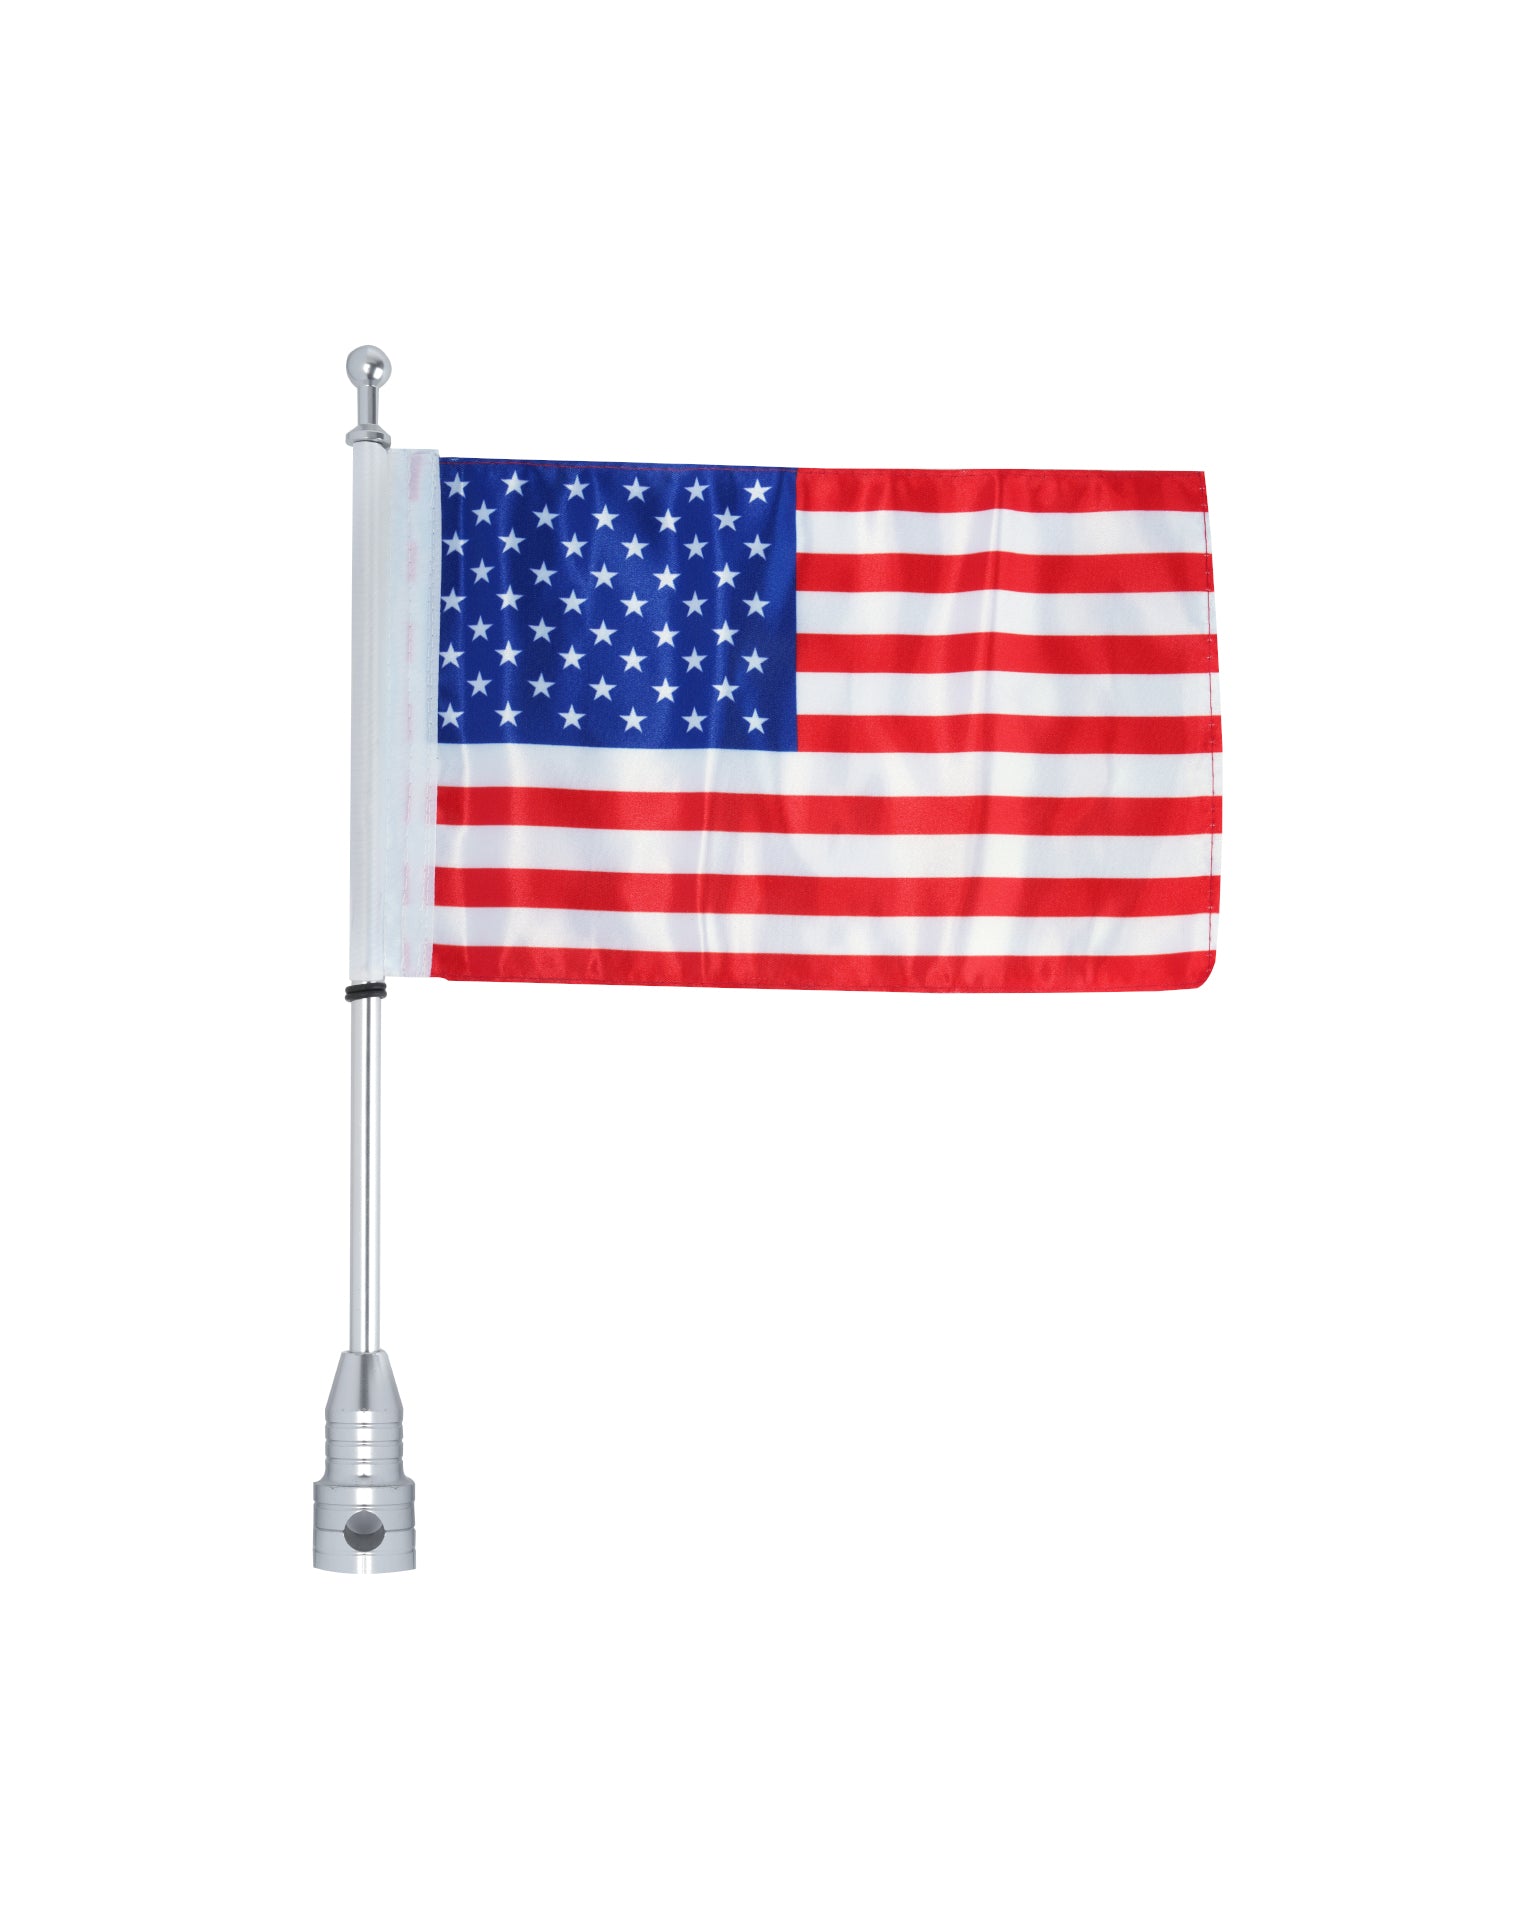 Motorcycle Flag Pole Mount and American Flag